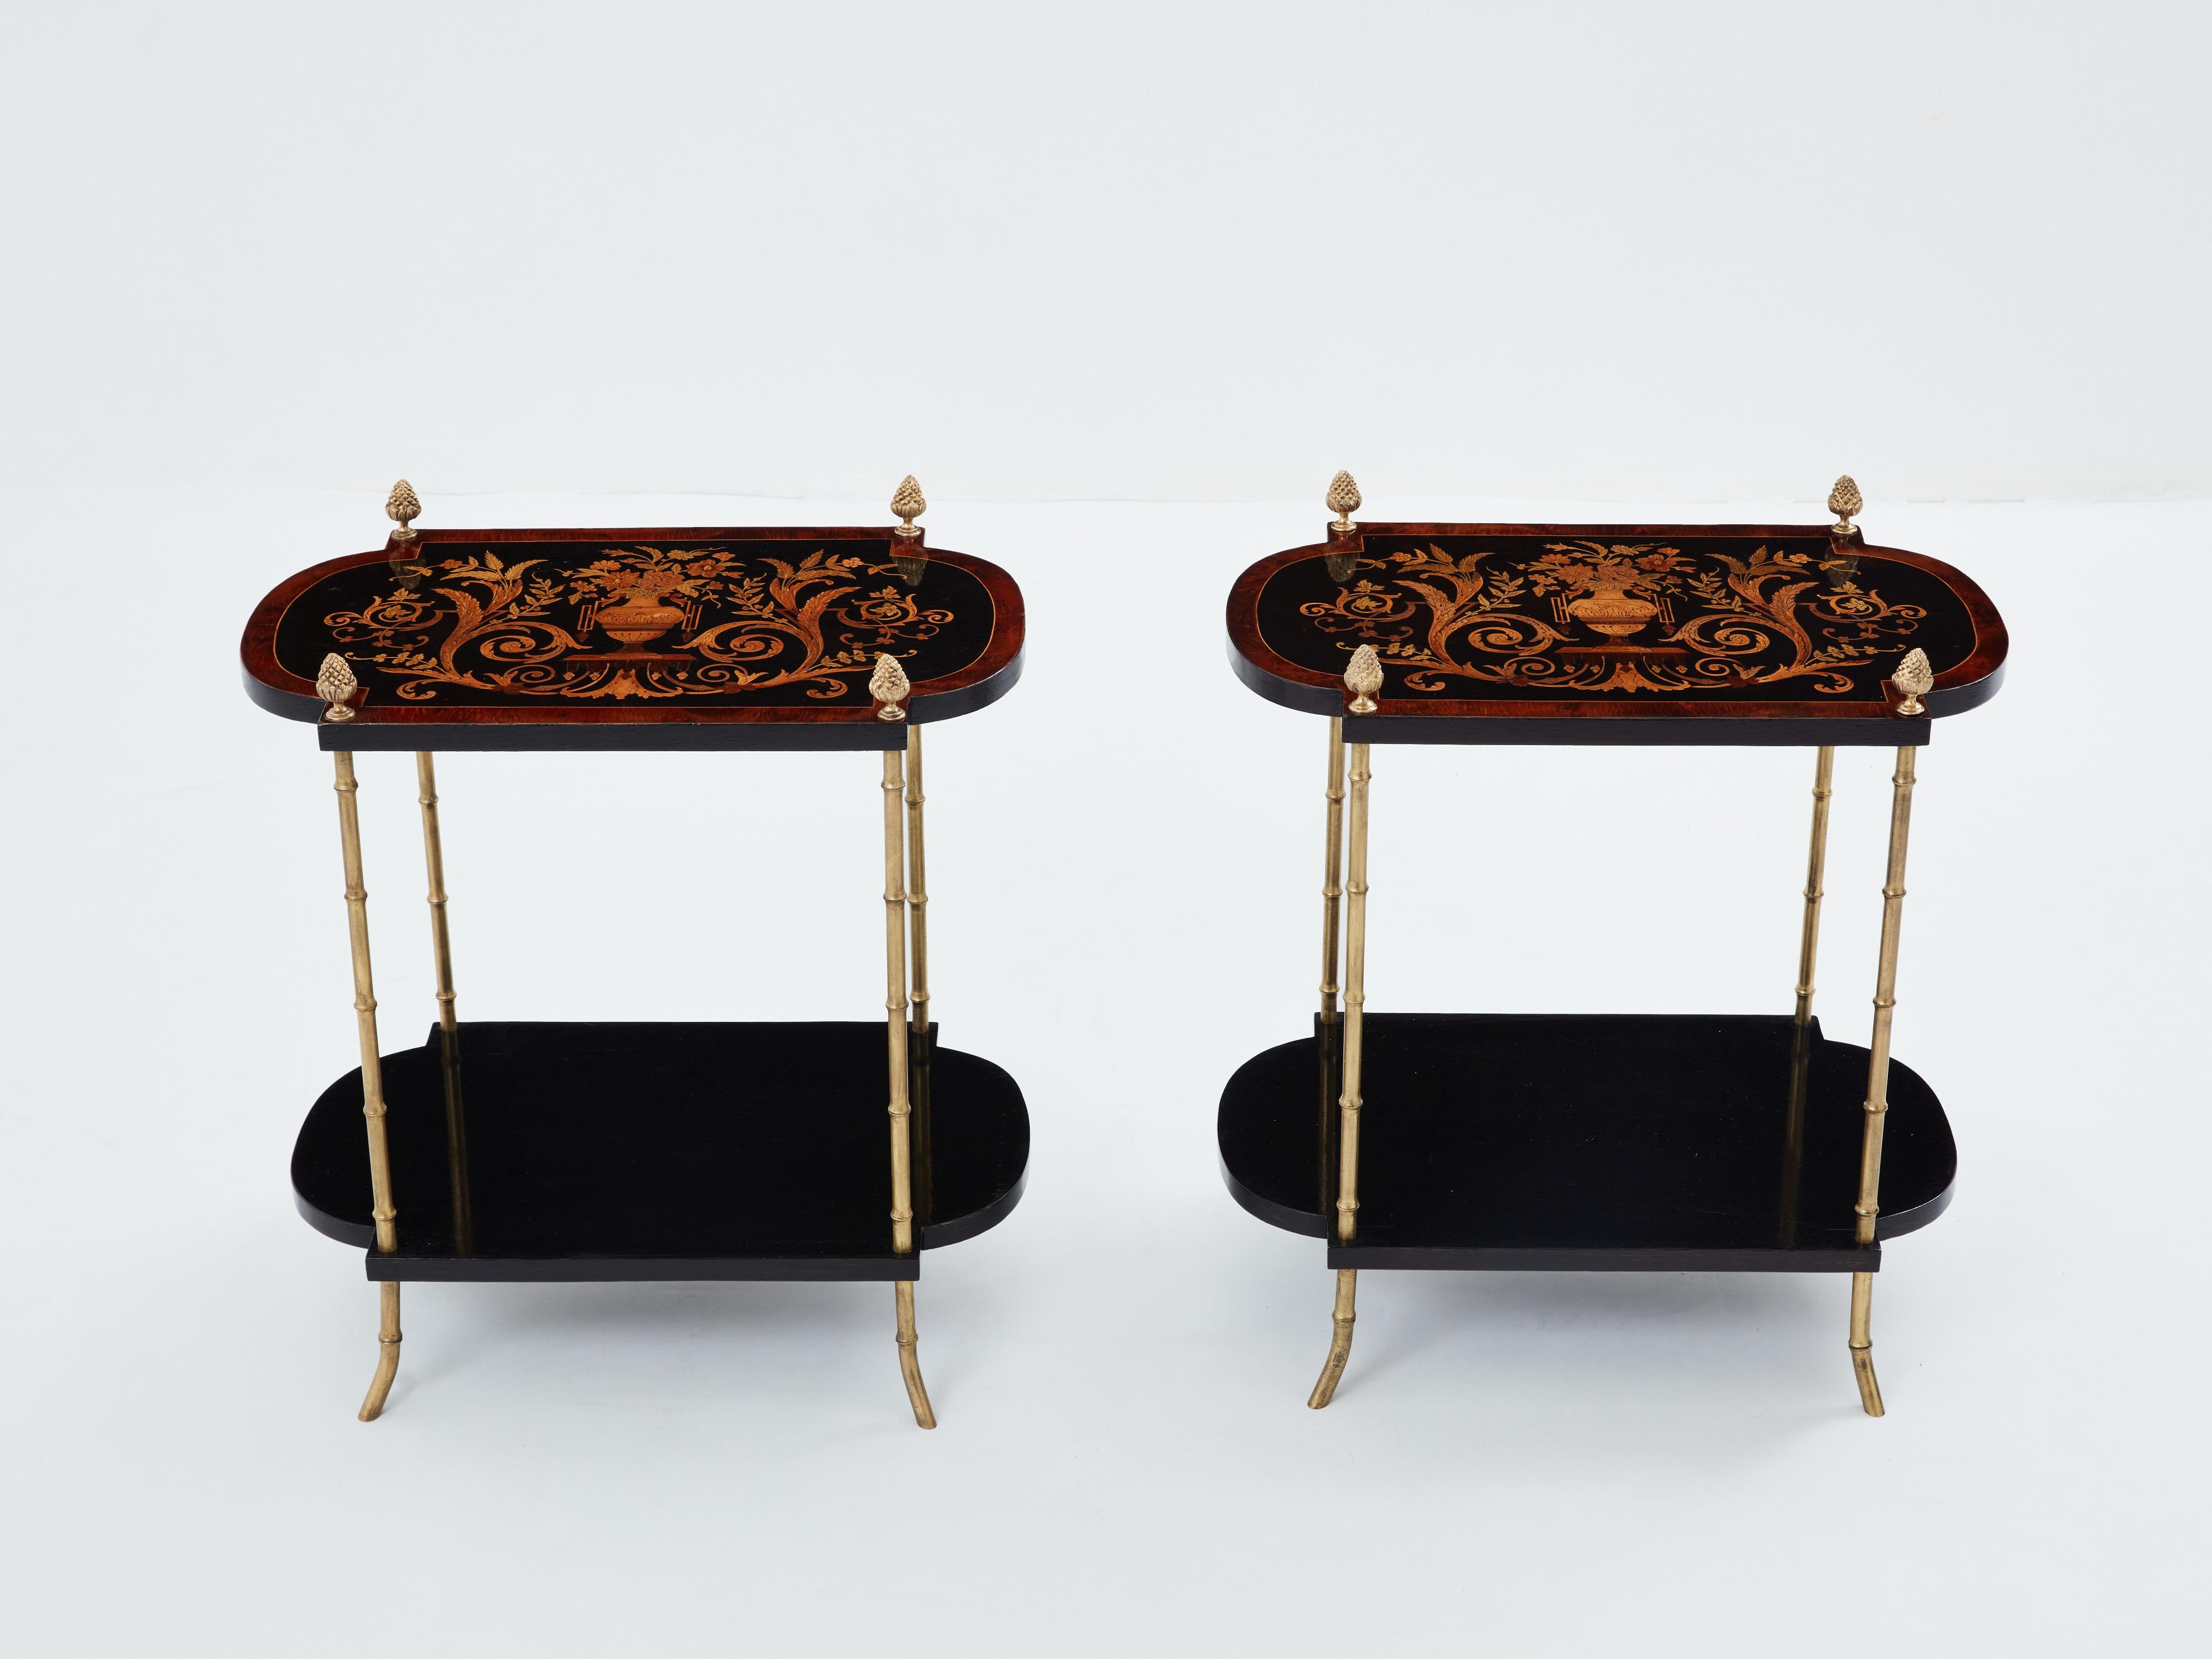 This unique pair of two-tier Maison Baguès side tables was created with solid bamboo shaped bronze and beautiful ebonized pearwood and marquetry tops in the late 1940s. The antique floral table tops marquetry, made out of stained maple, is a work of